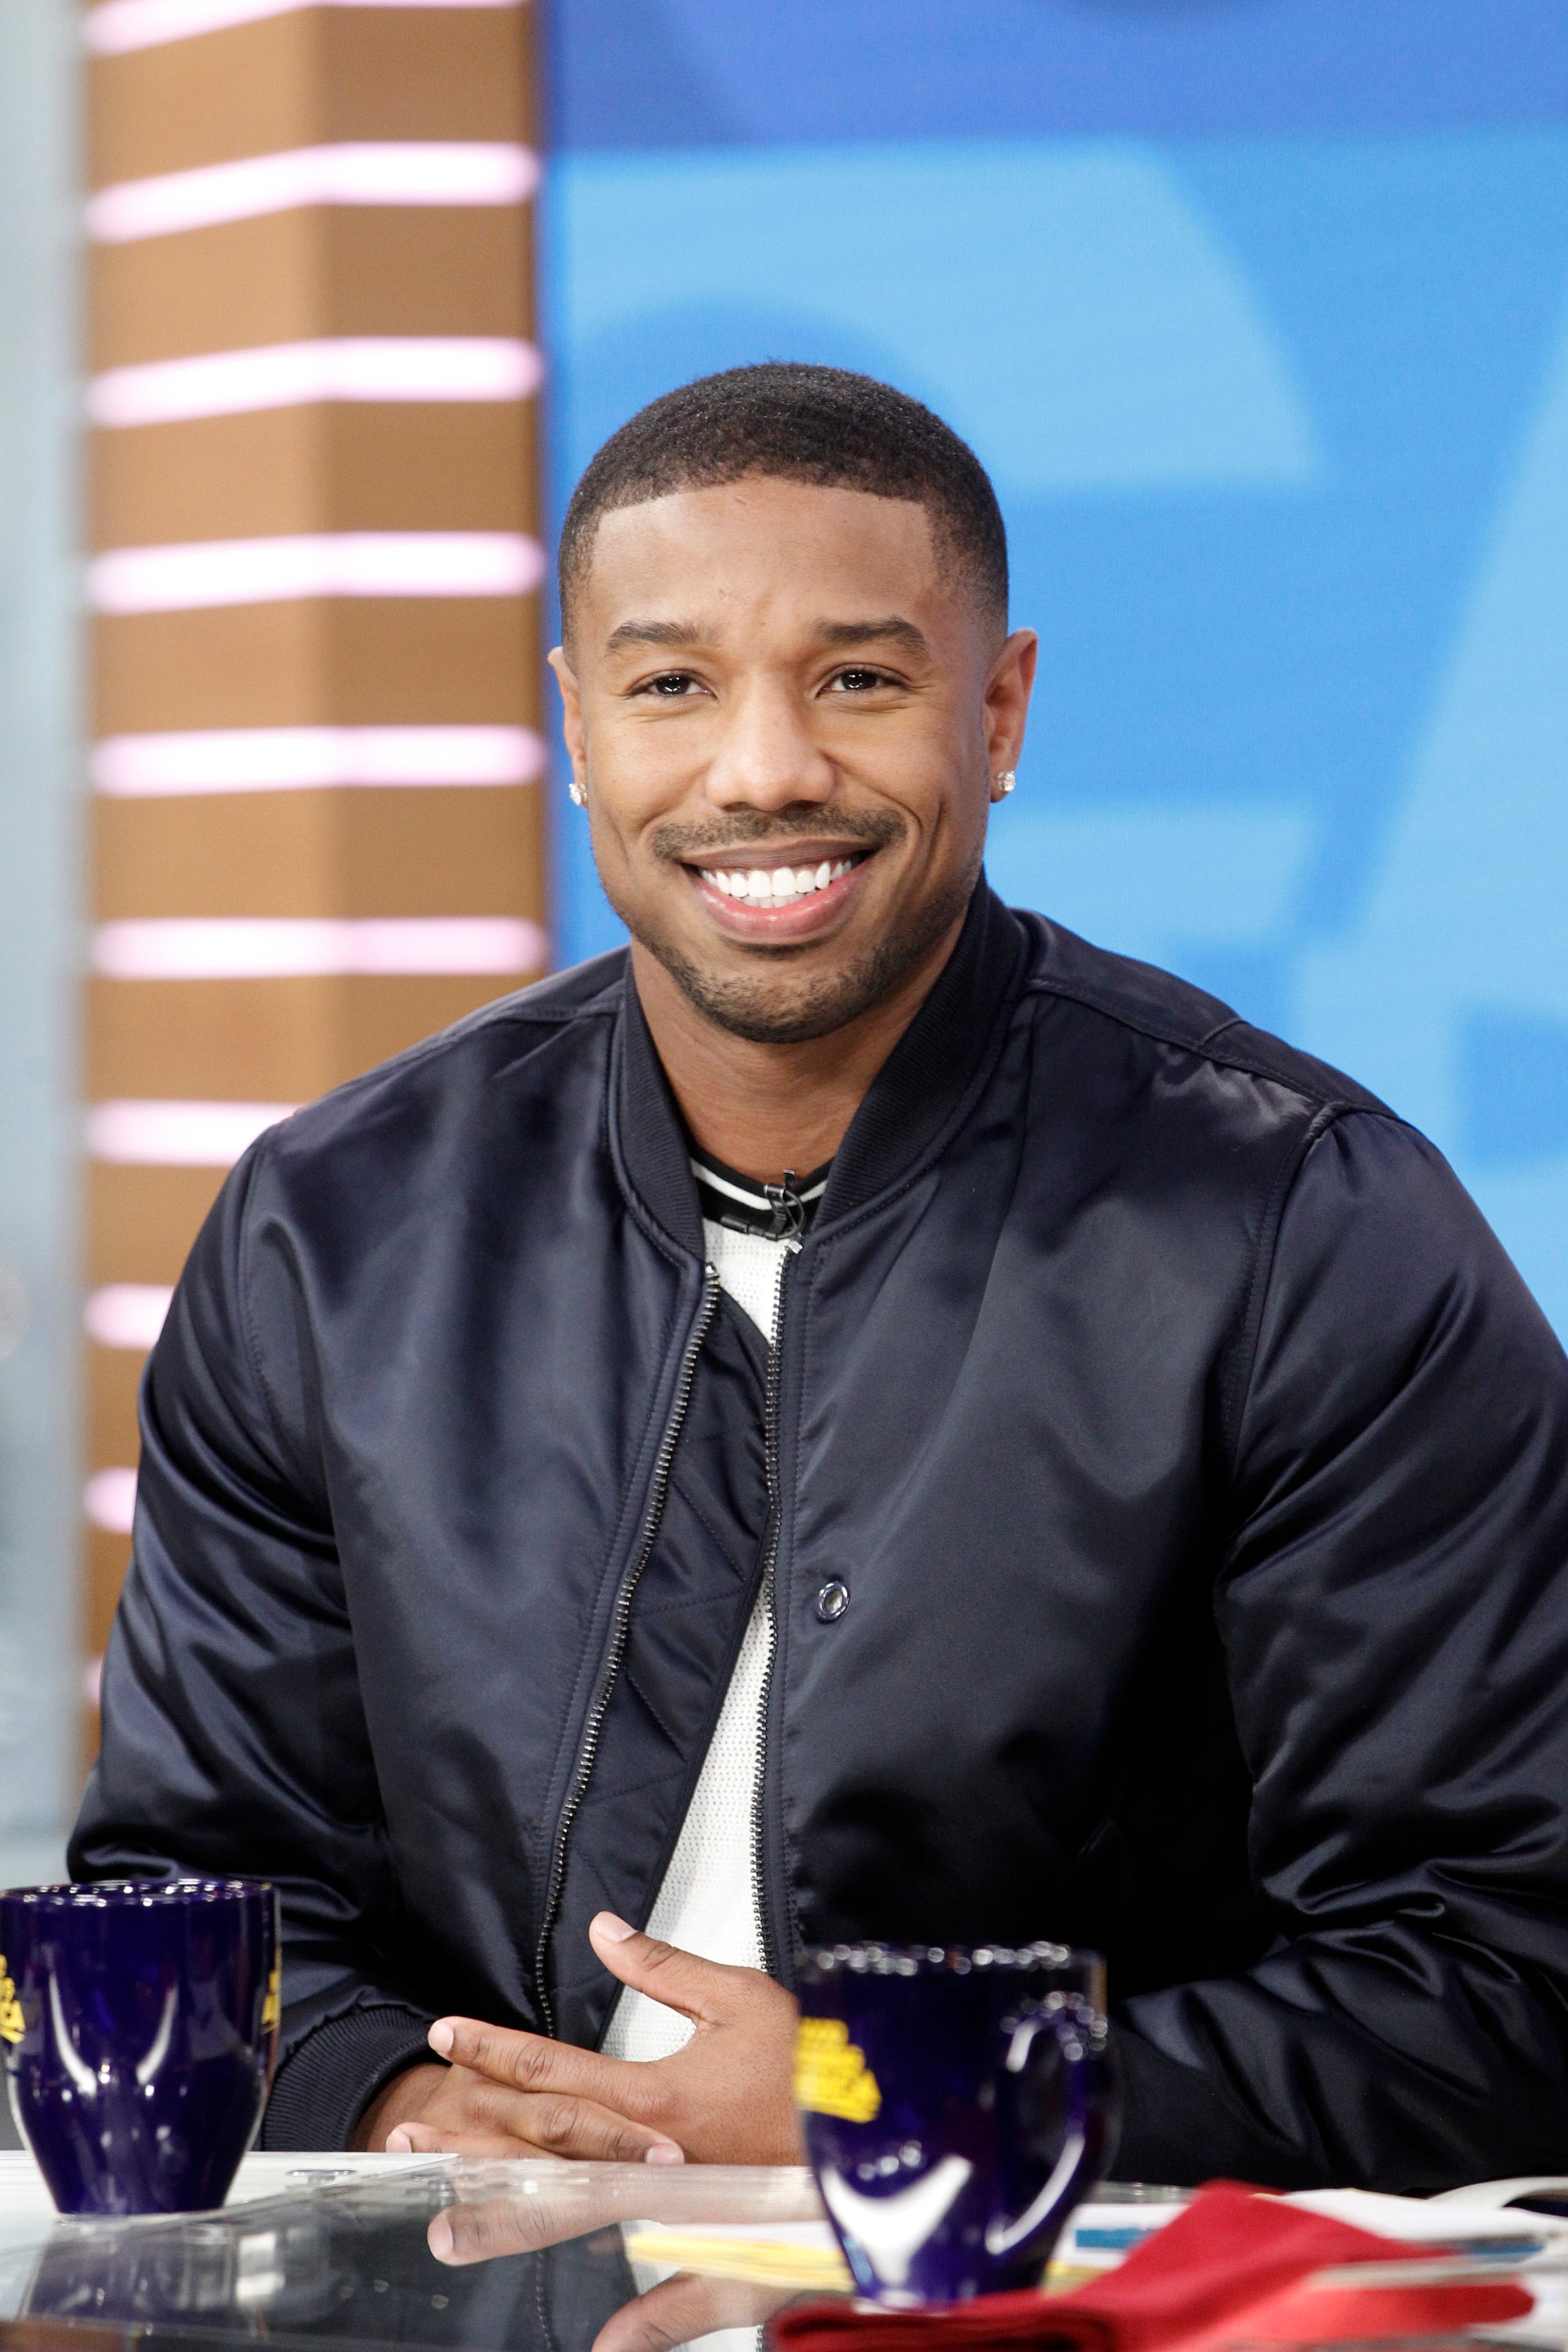 Michael B Jordan offers to buy teen 'Black Panther' fan a new retainer